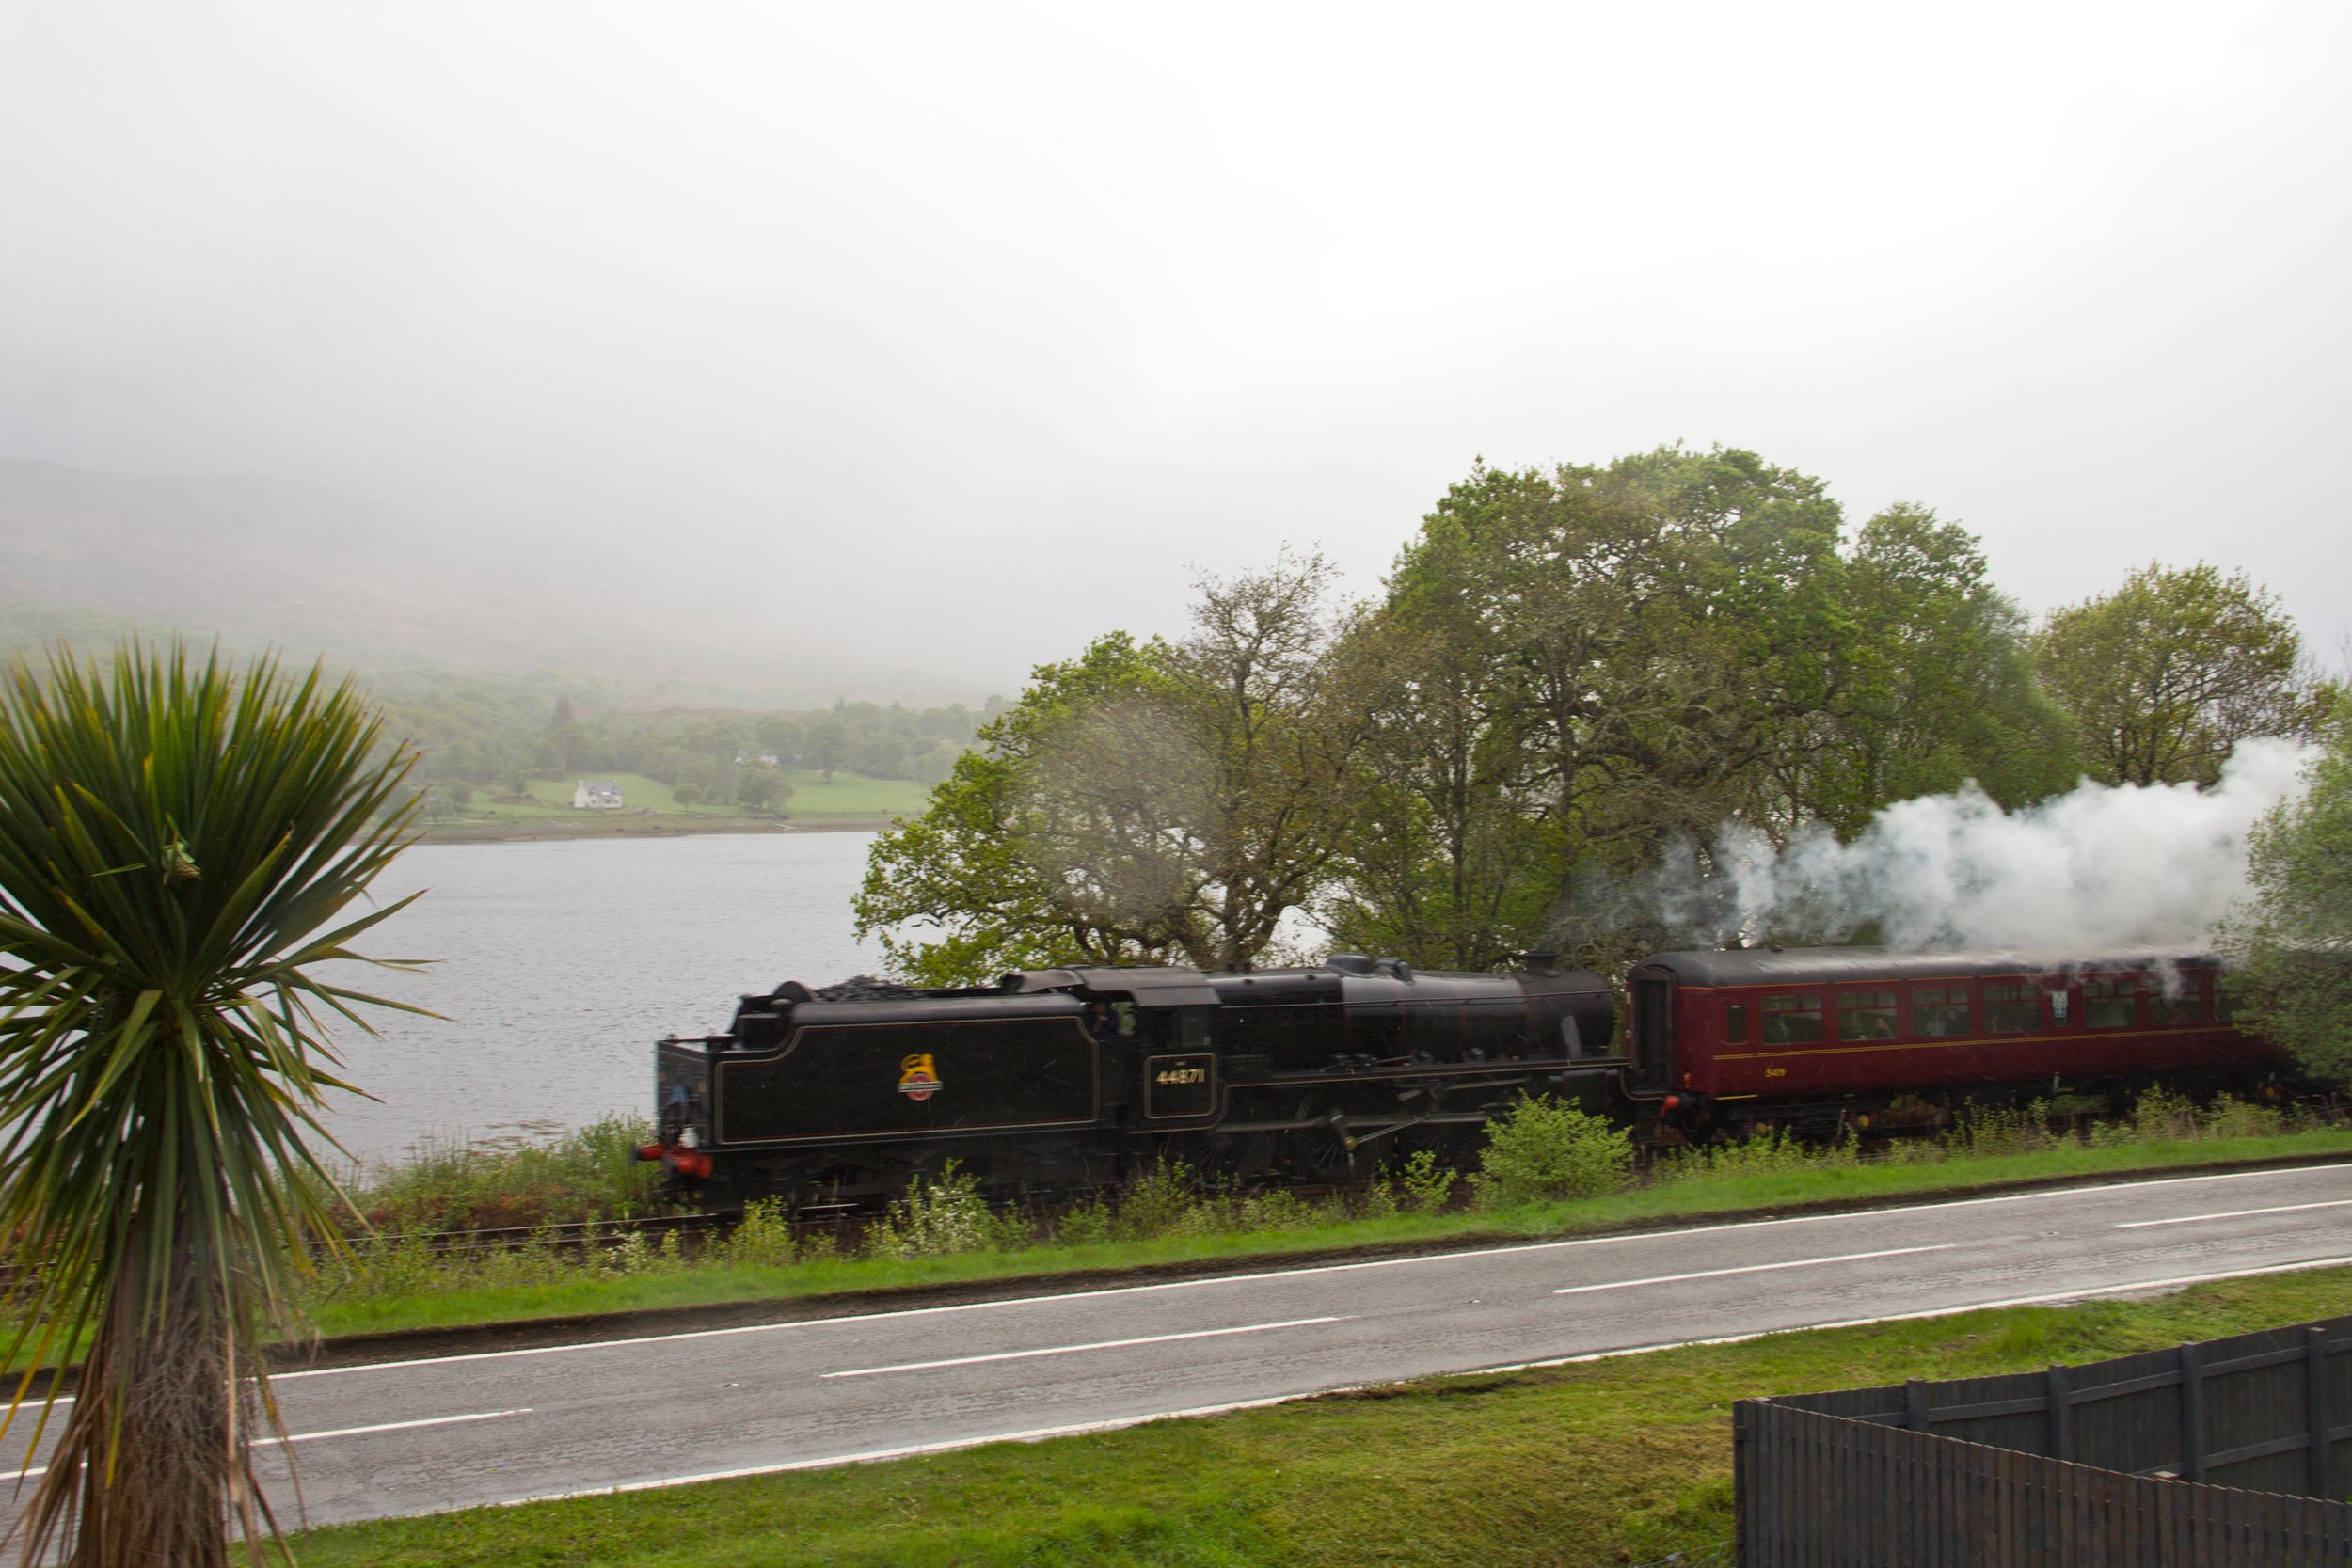 jacobite-steam-train-passing-in-front-of-our-airbnb